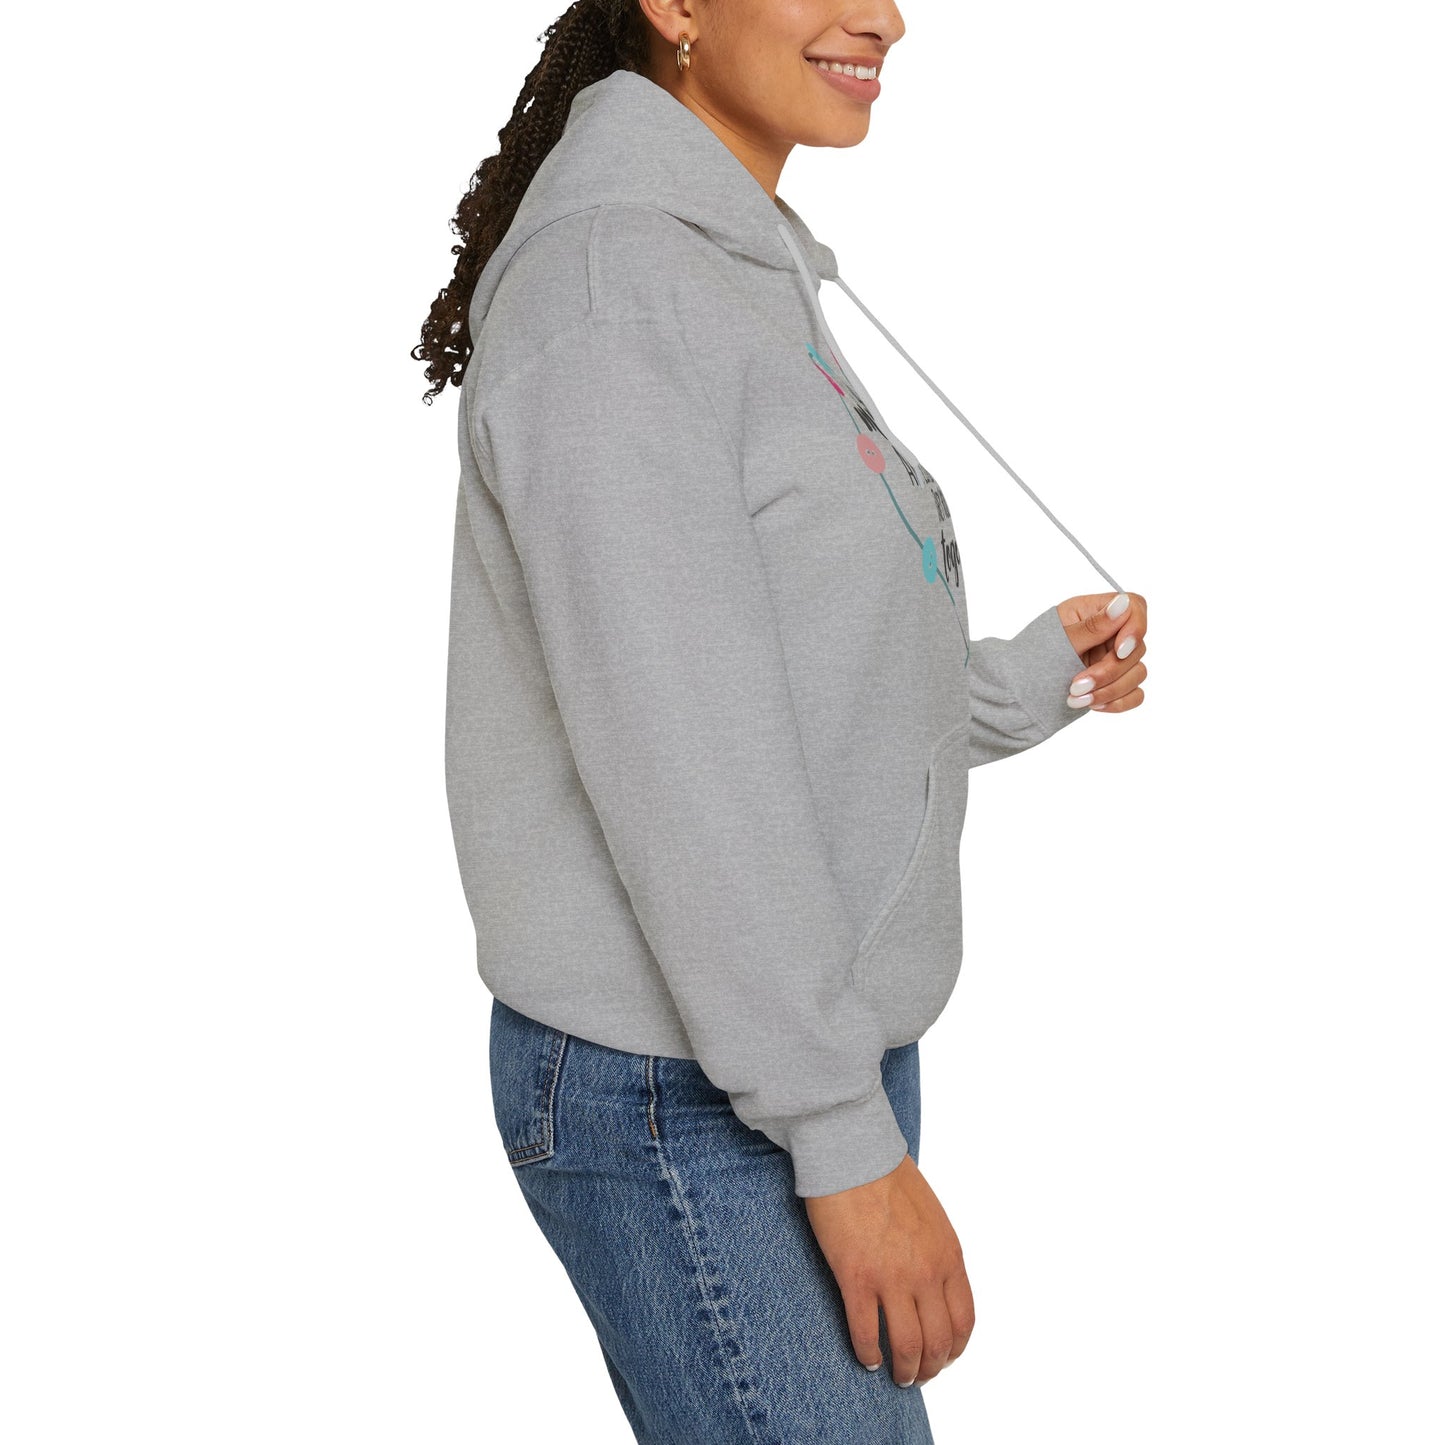 Mothers are like buttons - Unisex Heavy Blend™ Hooded Sweatshirt